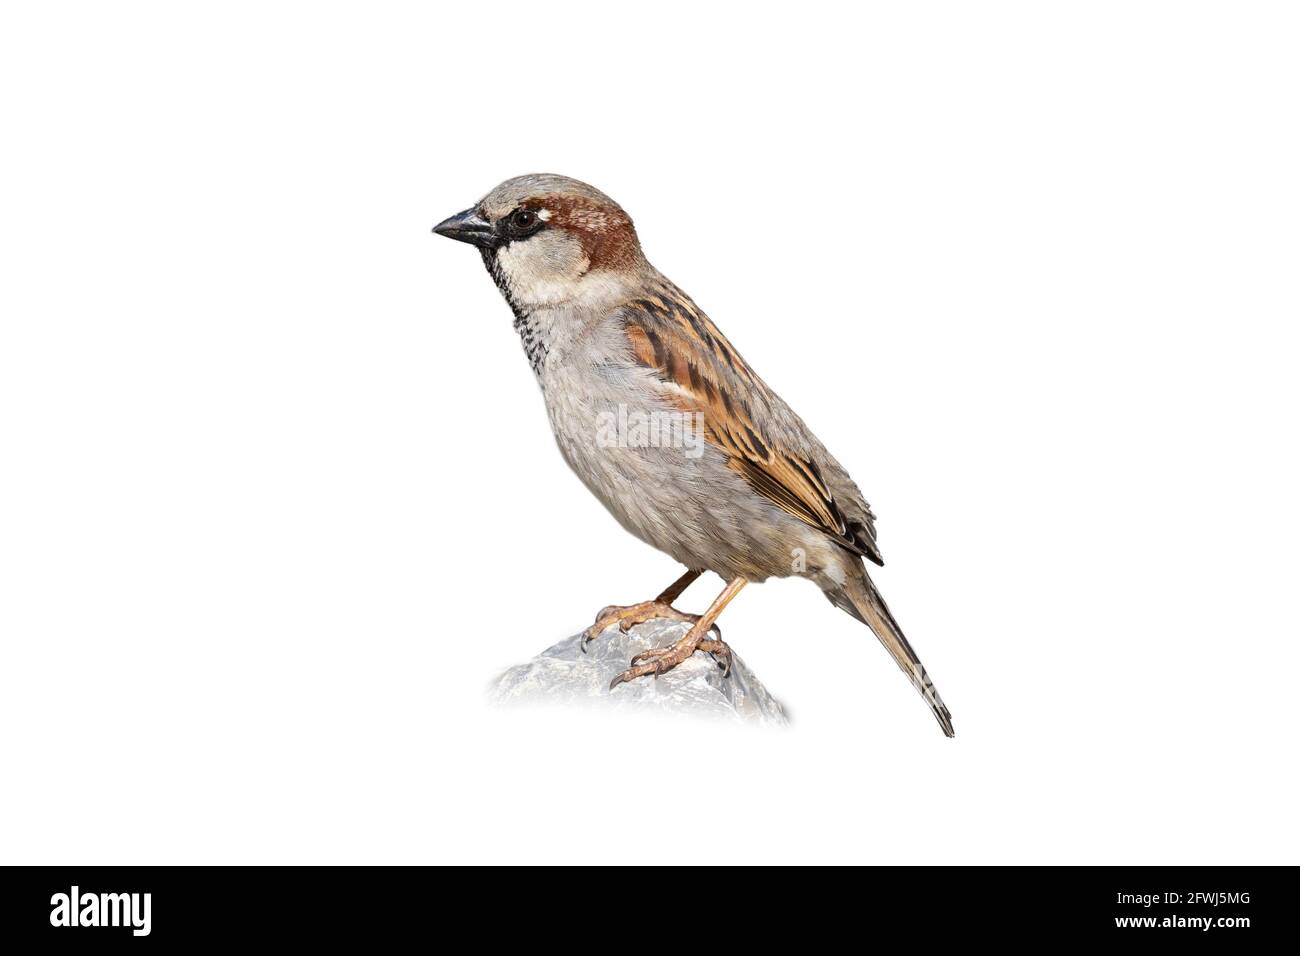 Male House Sparrow Bird, Cut out, on a White Background (Passer domesticus) Stock Photo